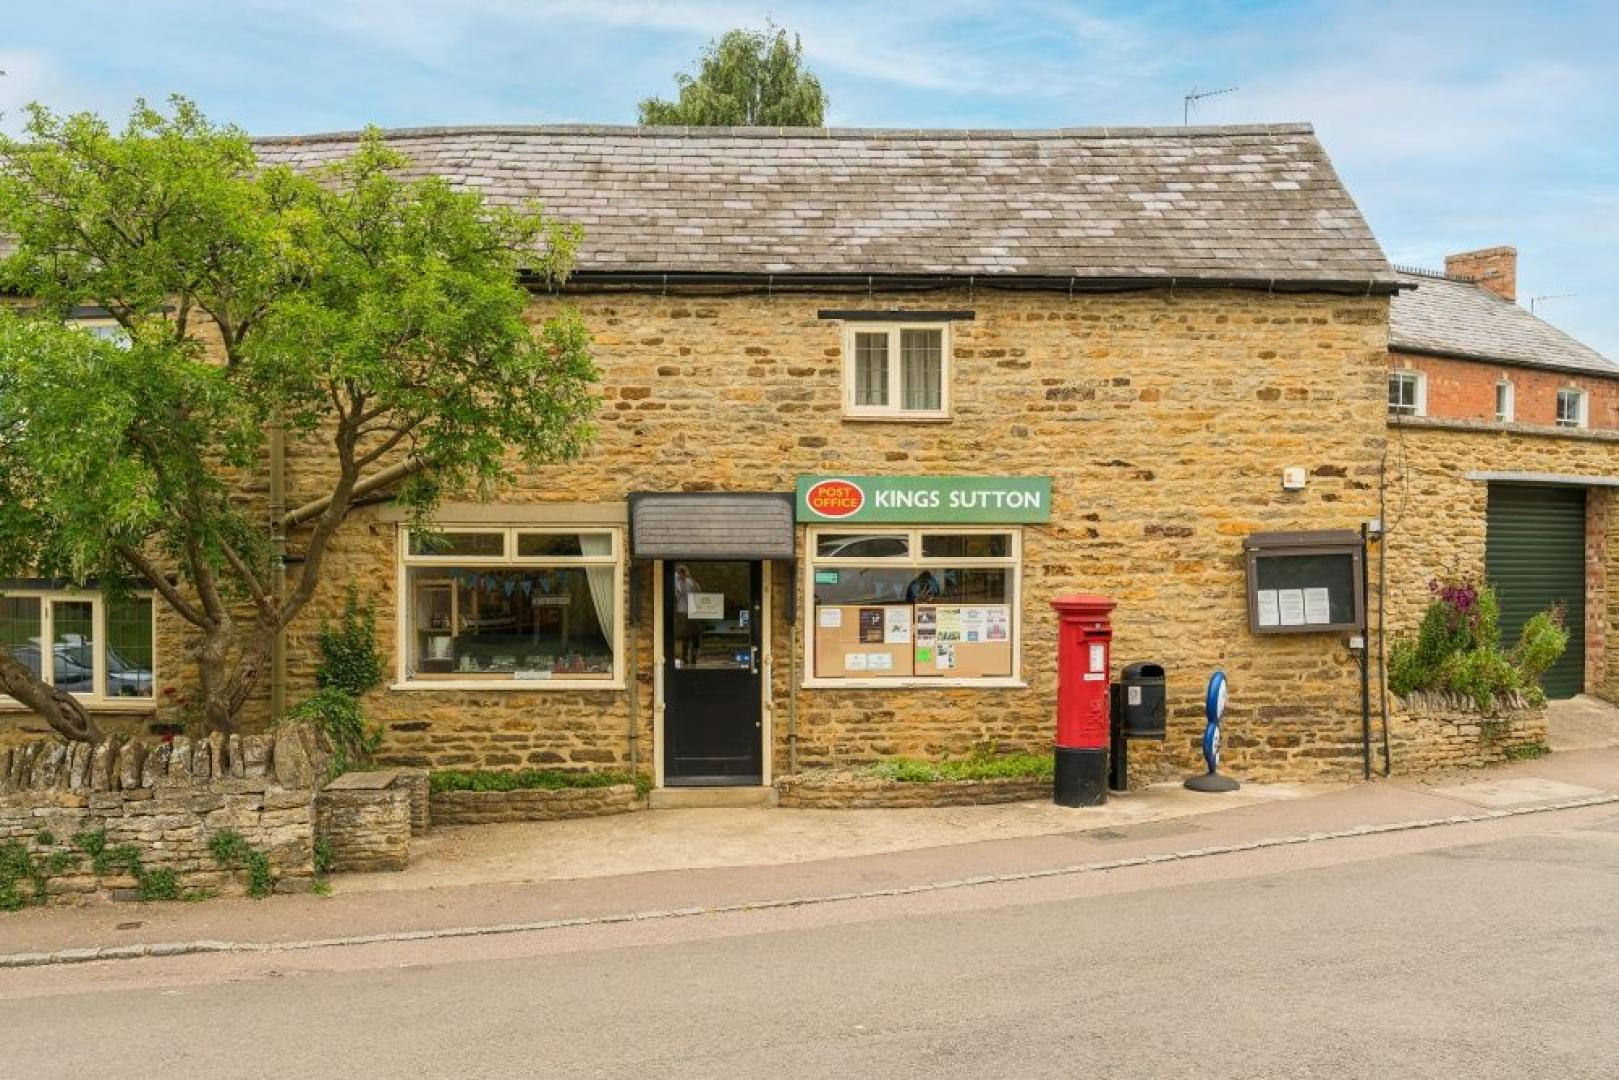 S34778NH - Post Office Business for Sale in Oxon - Kings Sutton Post Office  & Village Store :: Everett Masson & Furby